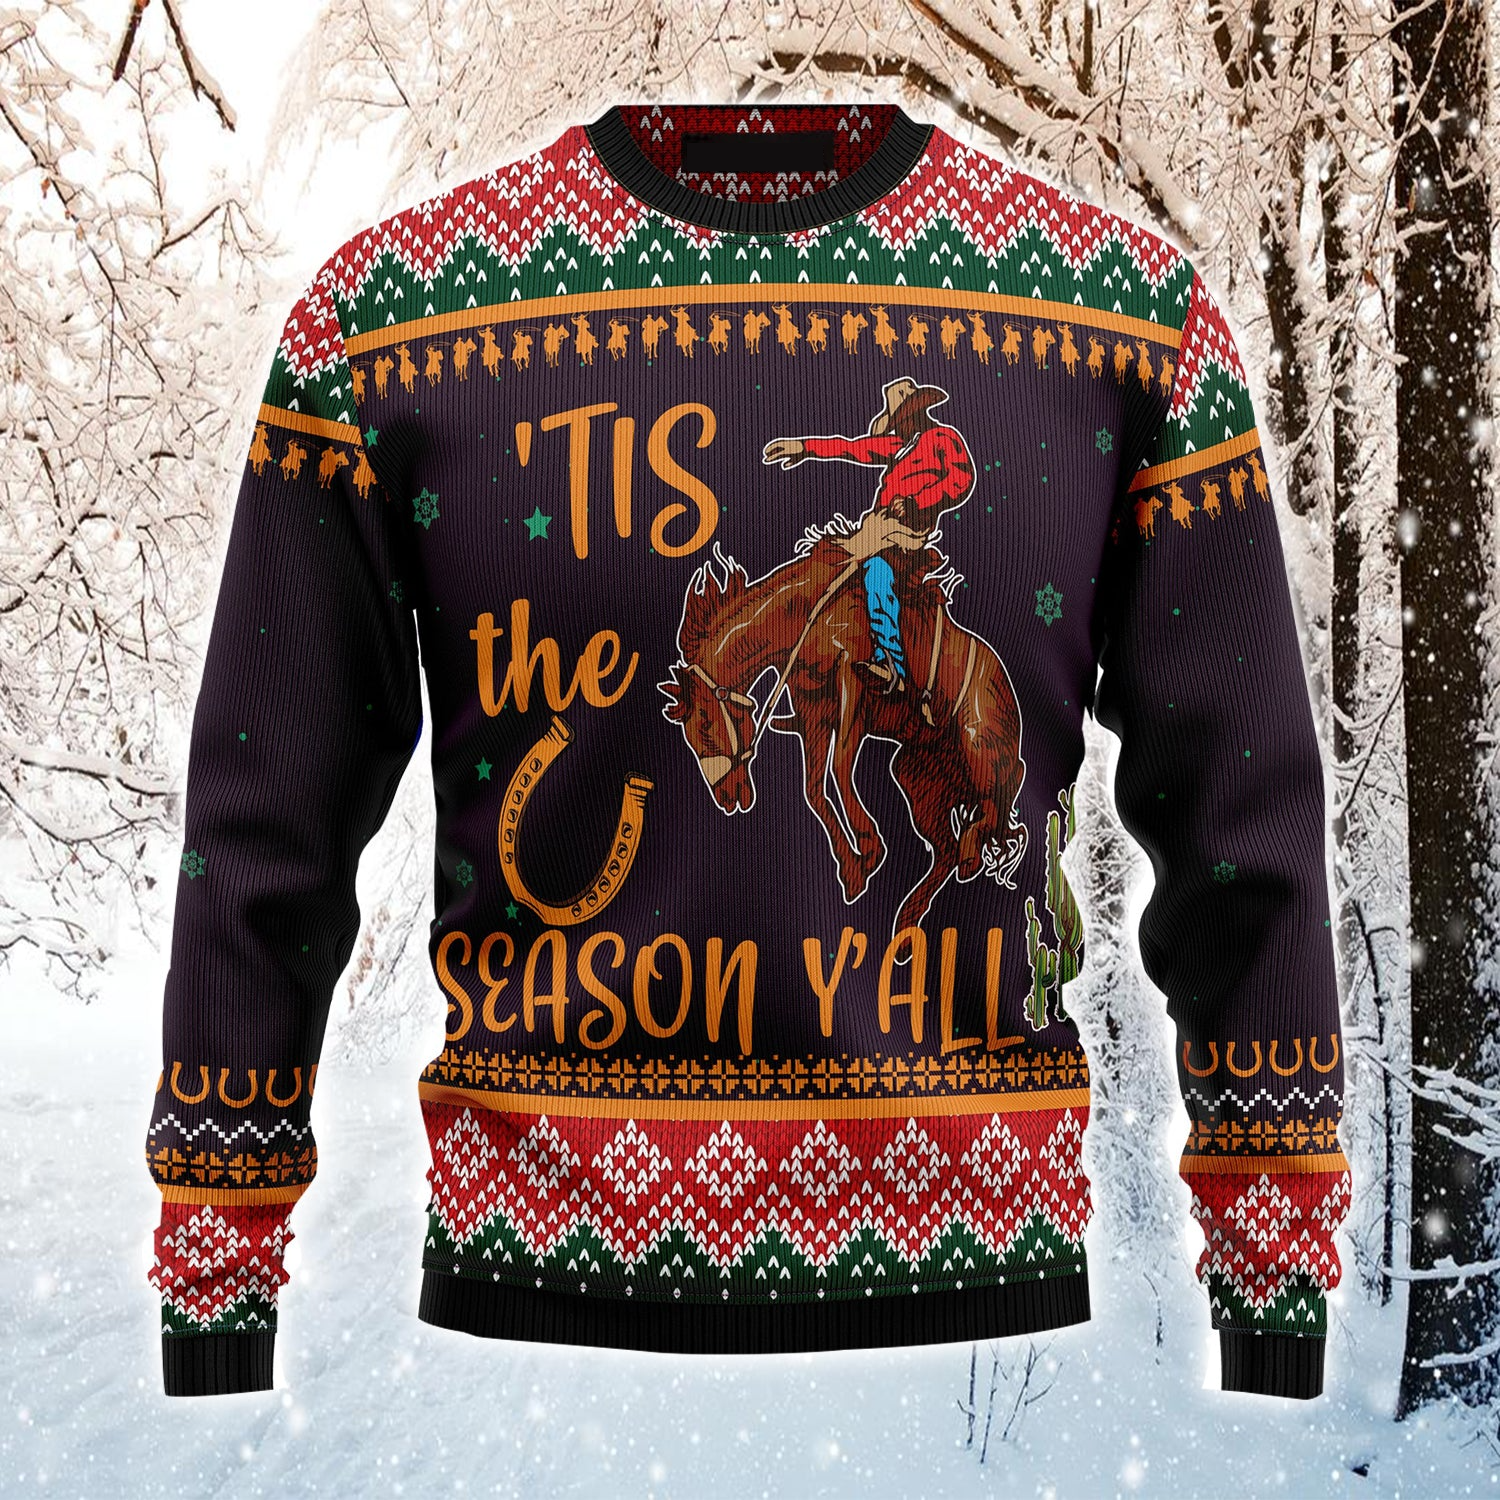 Cowboy Ugly Christmas Sweater/ Cowboy Season Christmas Pattern Ugly Sweater For Men & Women - Best Gift For Christmas/ Friends/ Cowboy